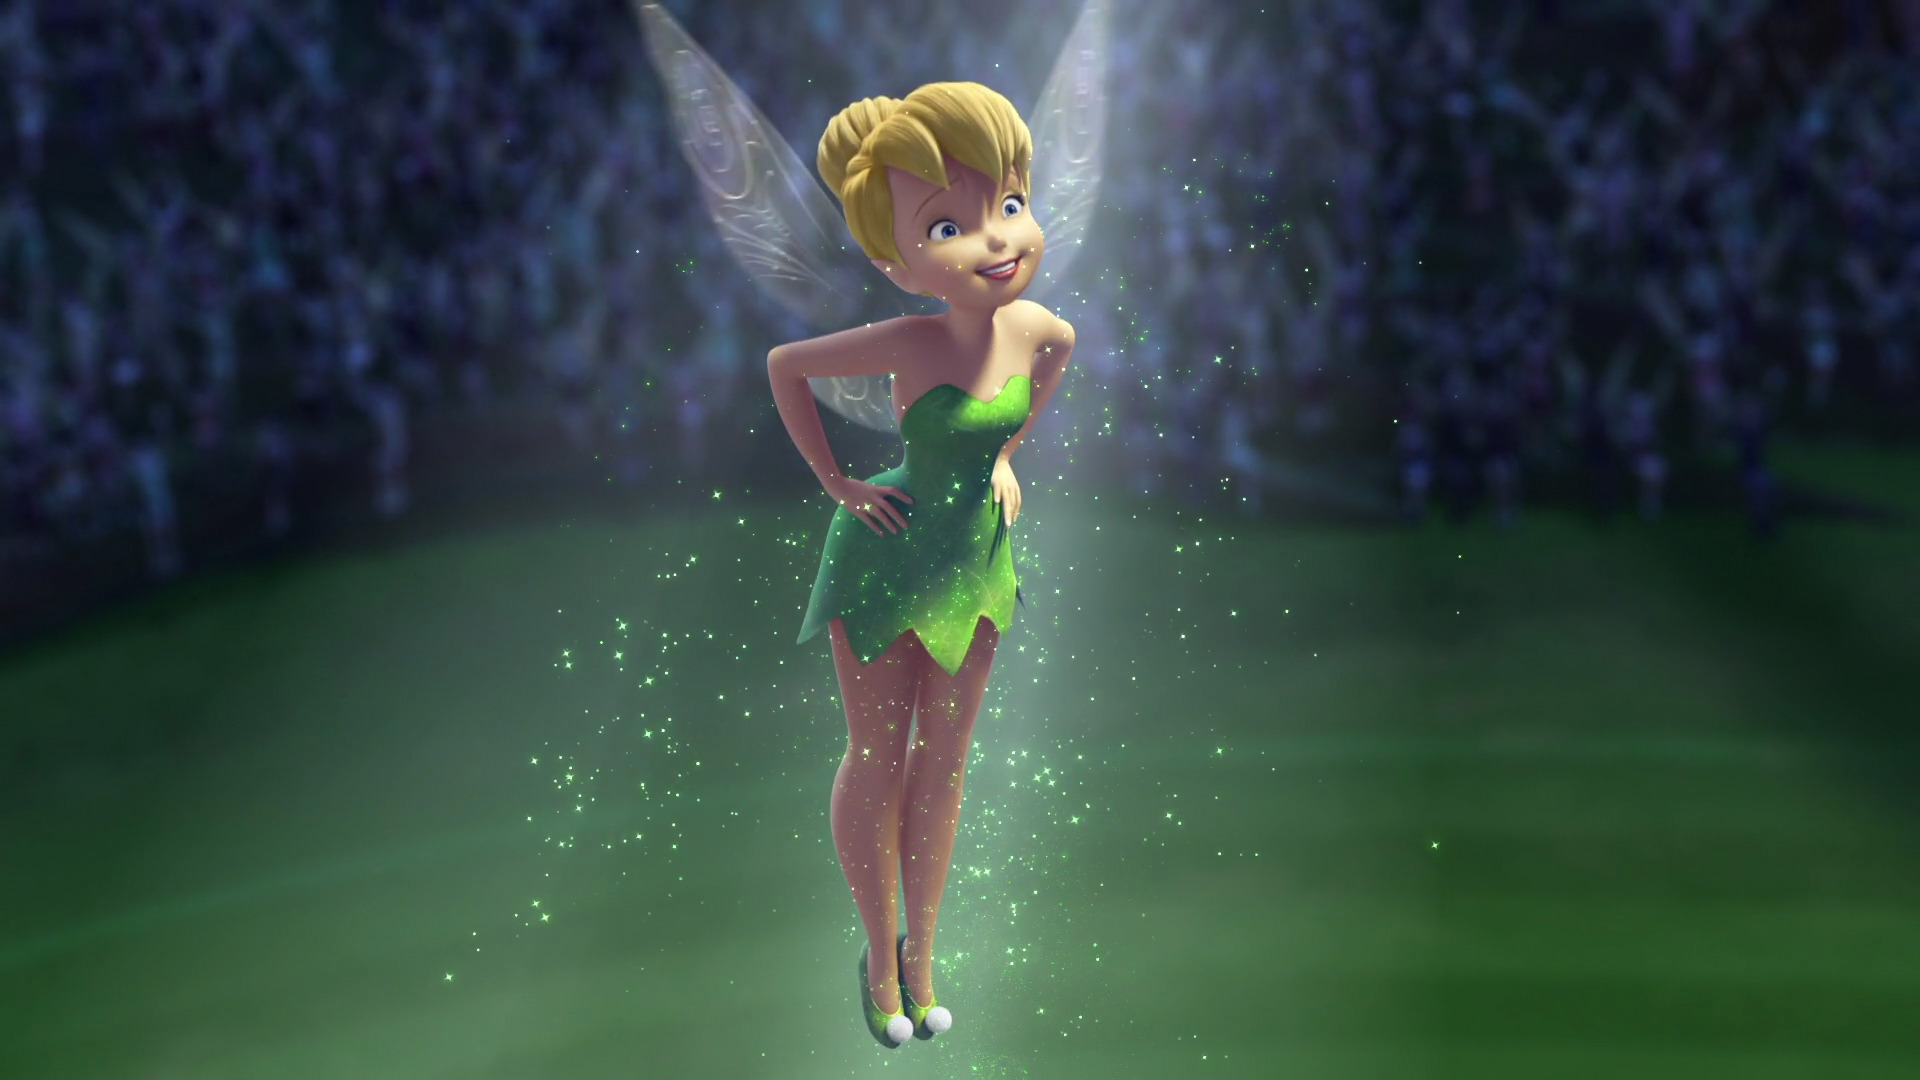 The Pirate Fairy Fairy Tinker Bell 1920x1080